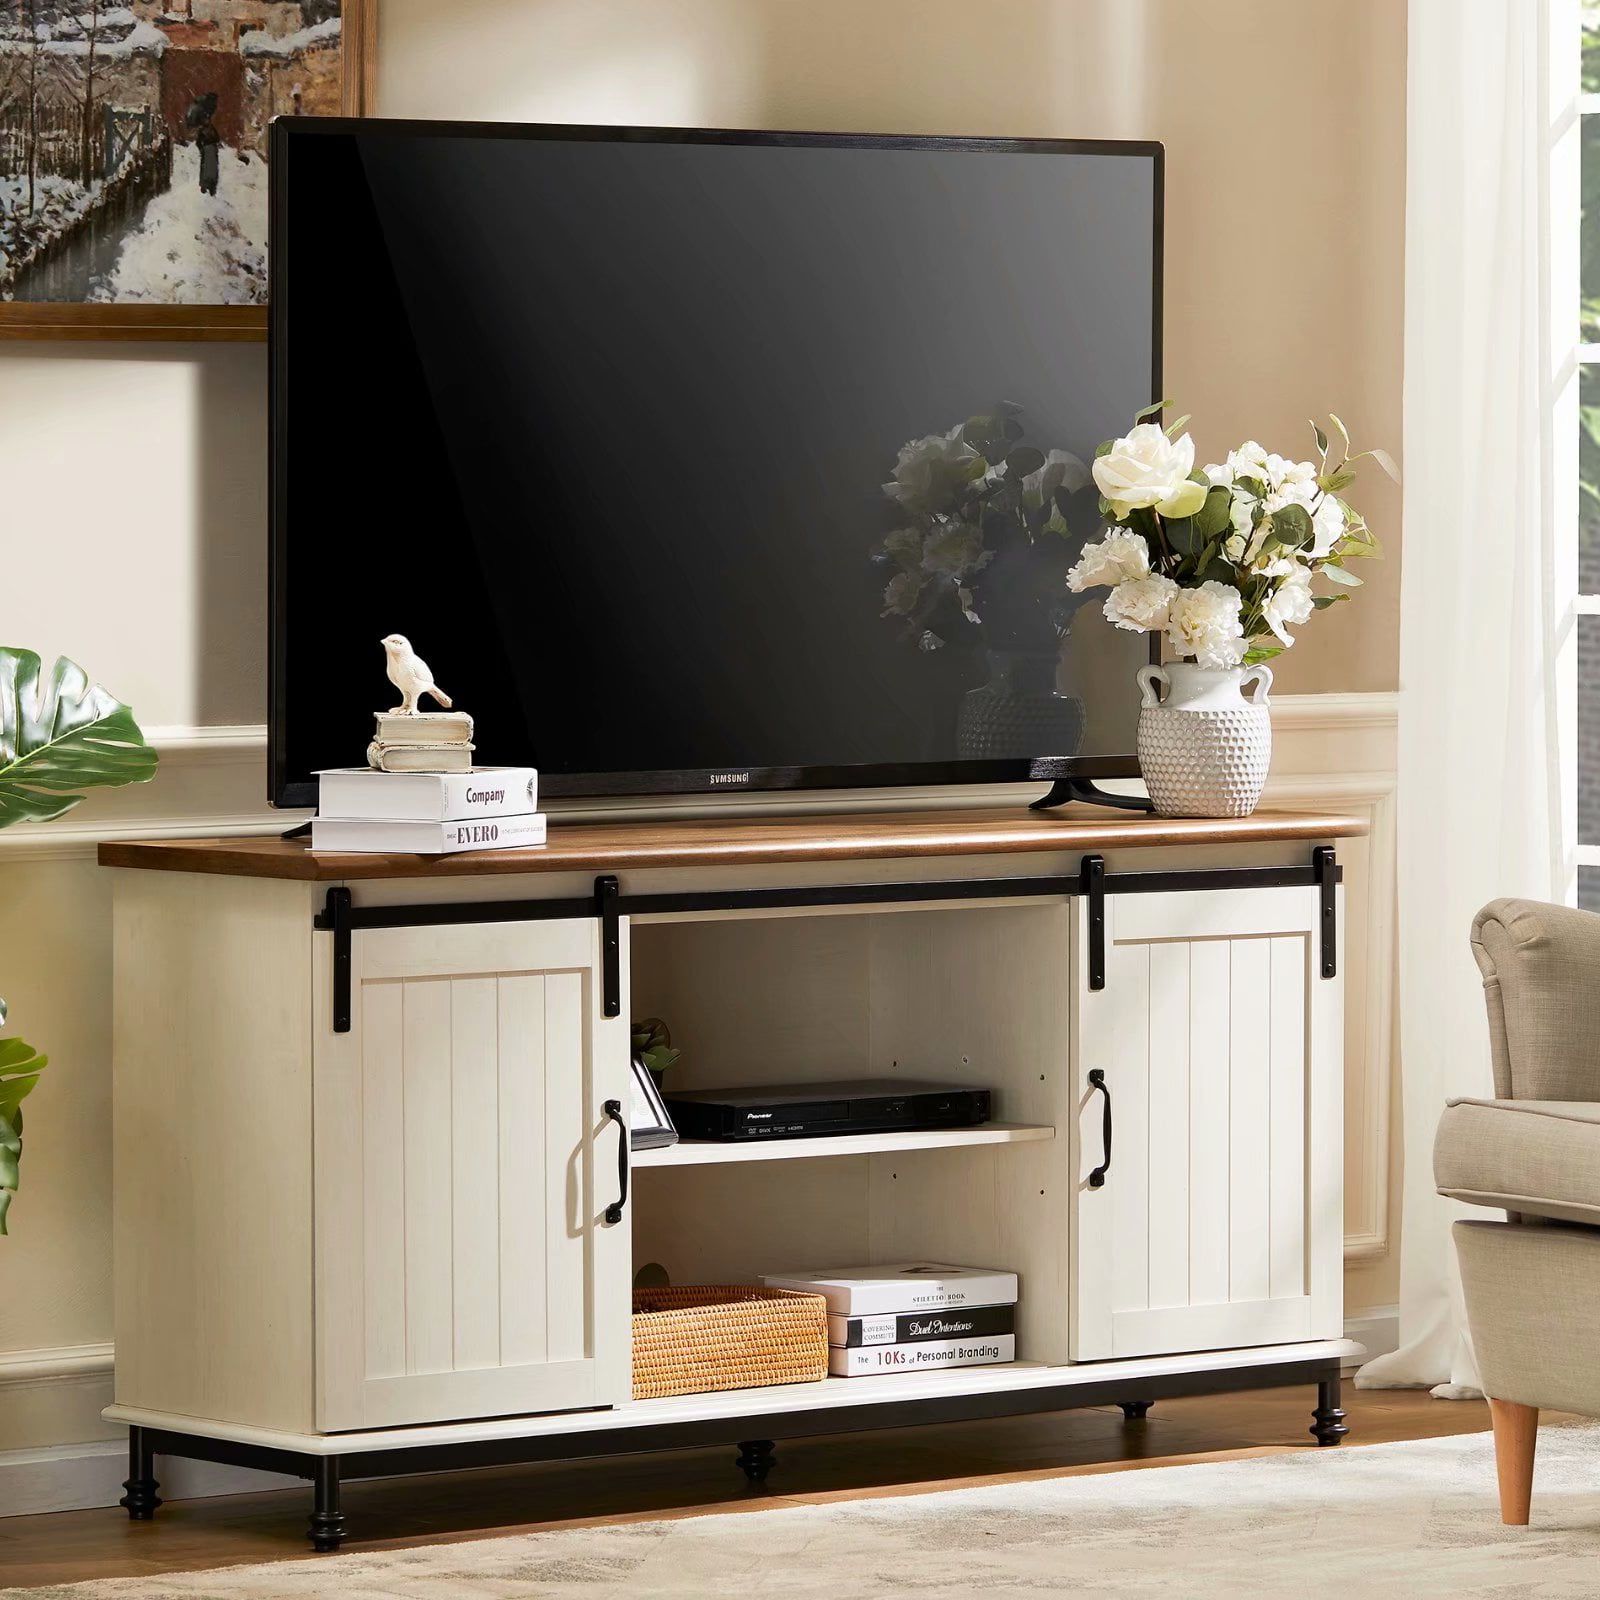 Farmhouse Stands For Tvs In Latest Buy Wampat Farmhouse Tv Stand Sliding Barn Door Entertainment Center (View 15 of 15)